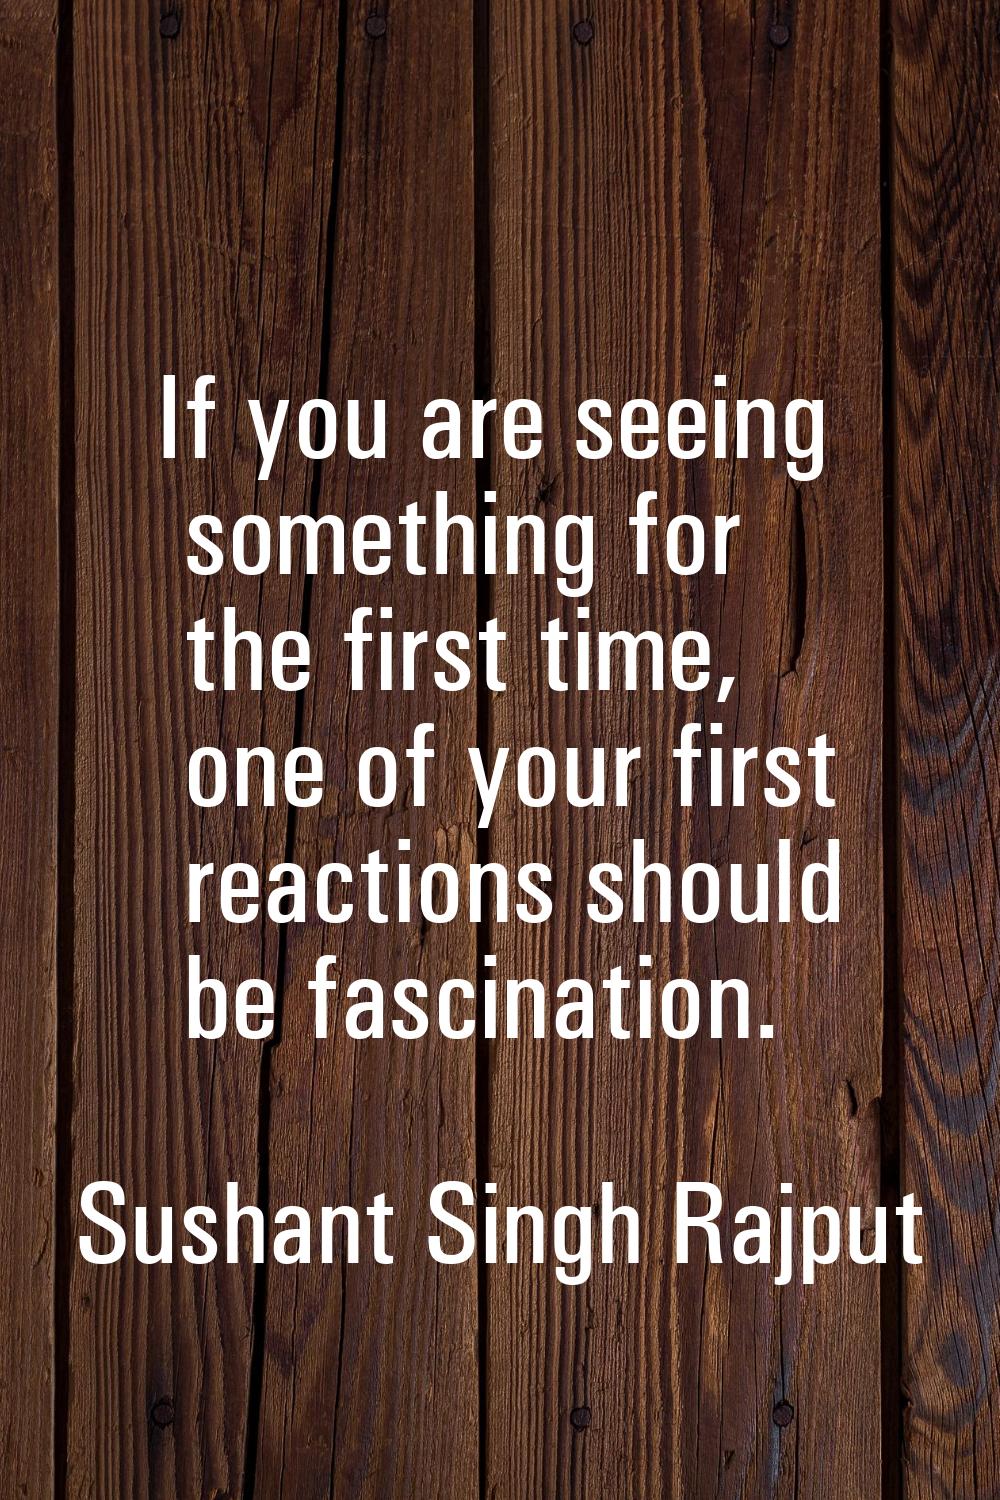 If you are seeing something for the first time, one of your first reactions should be fascination.